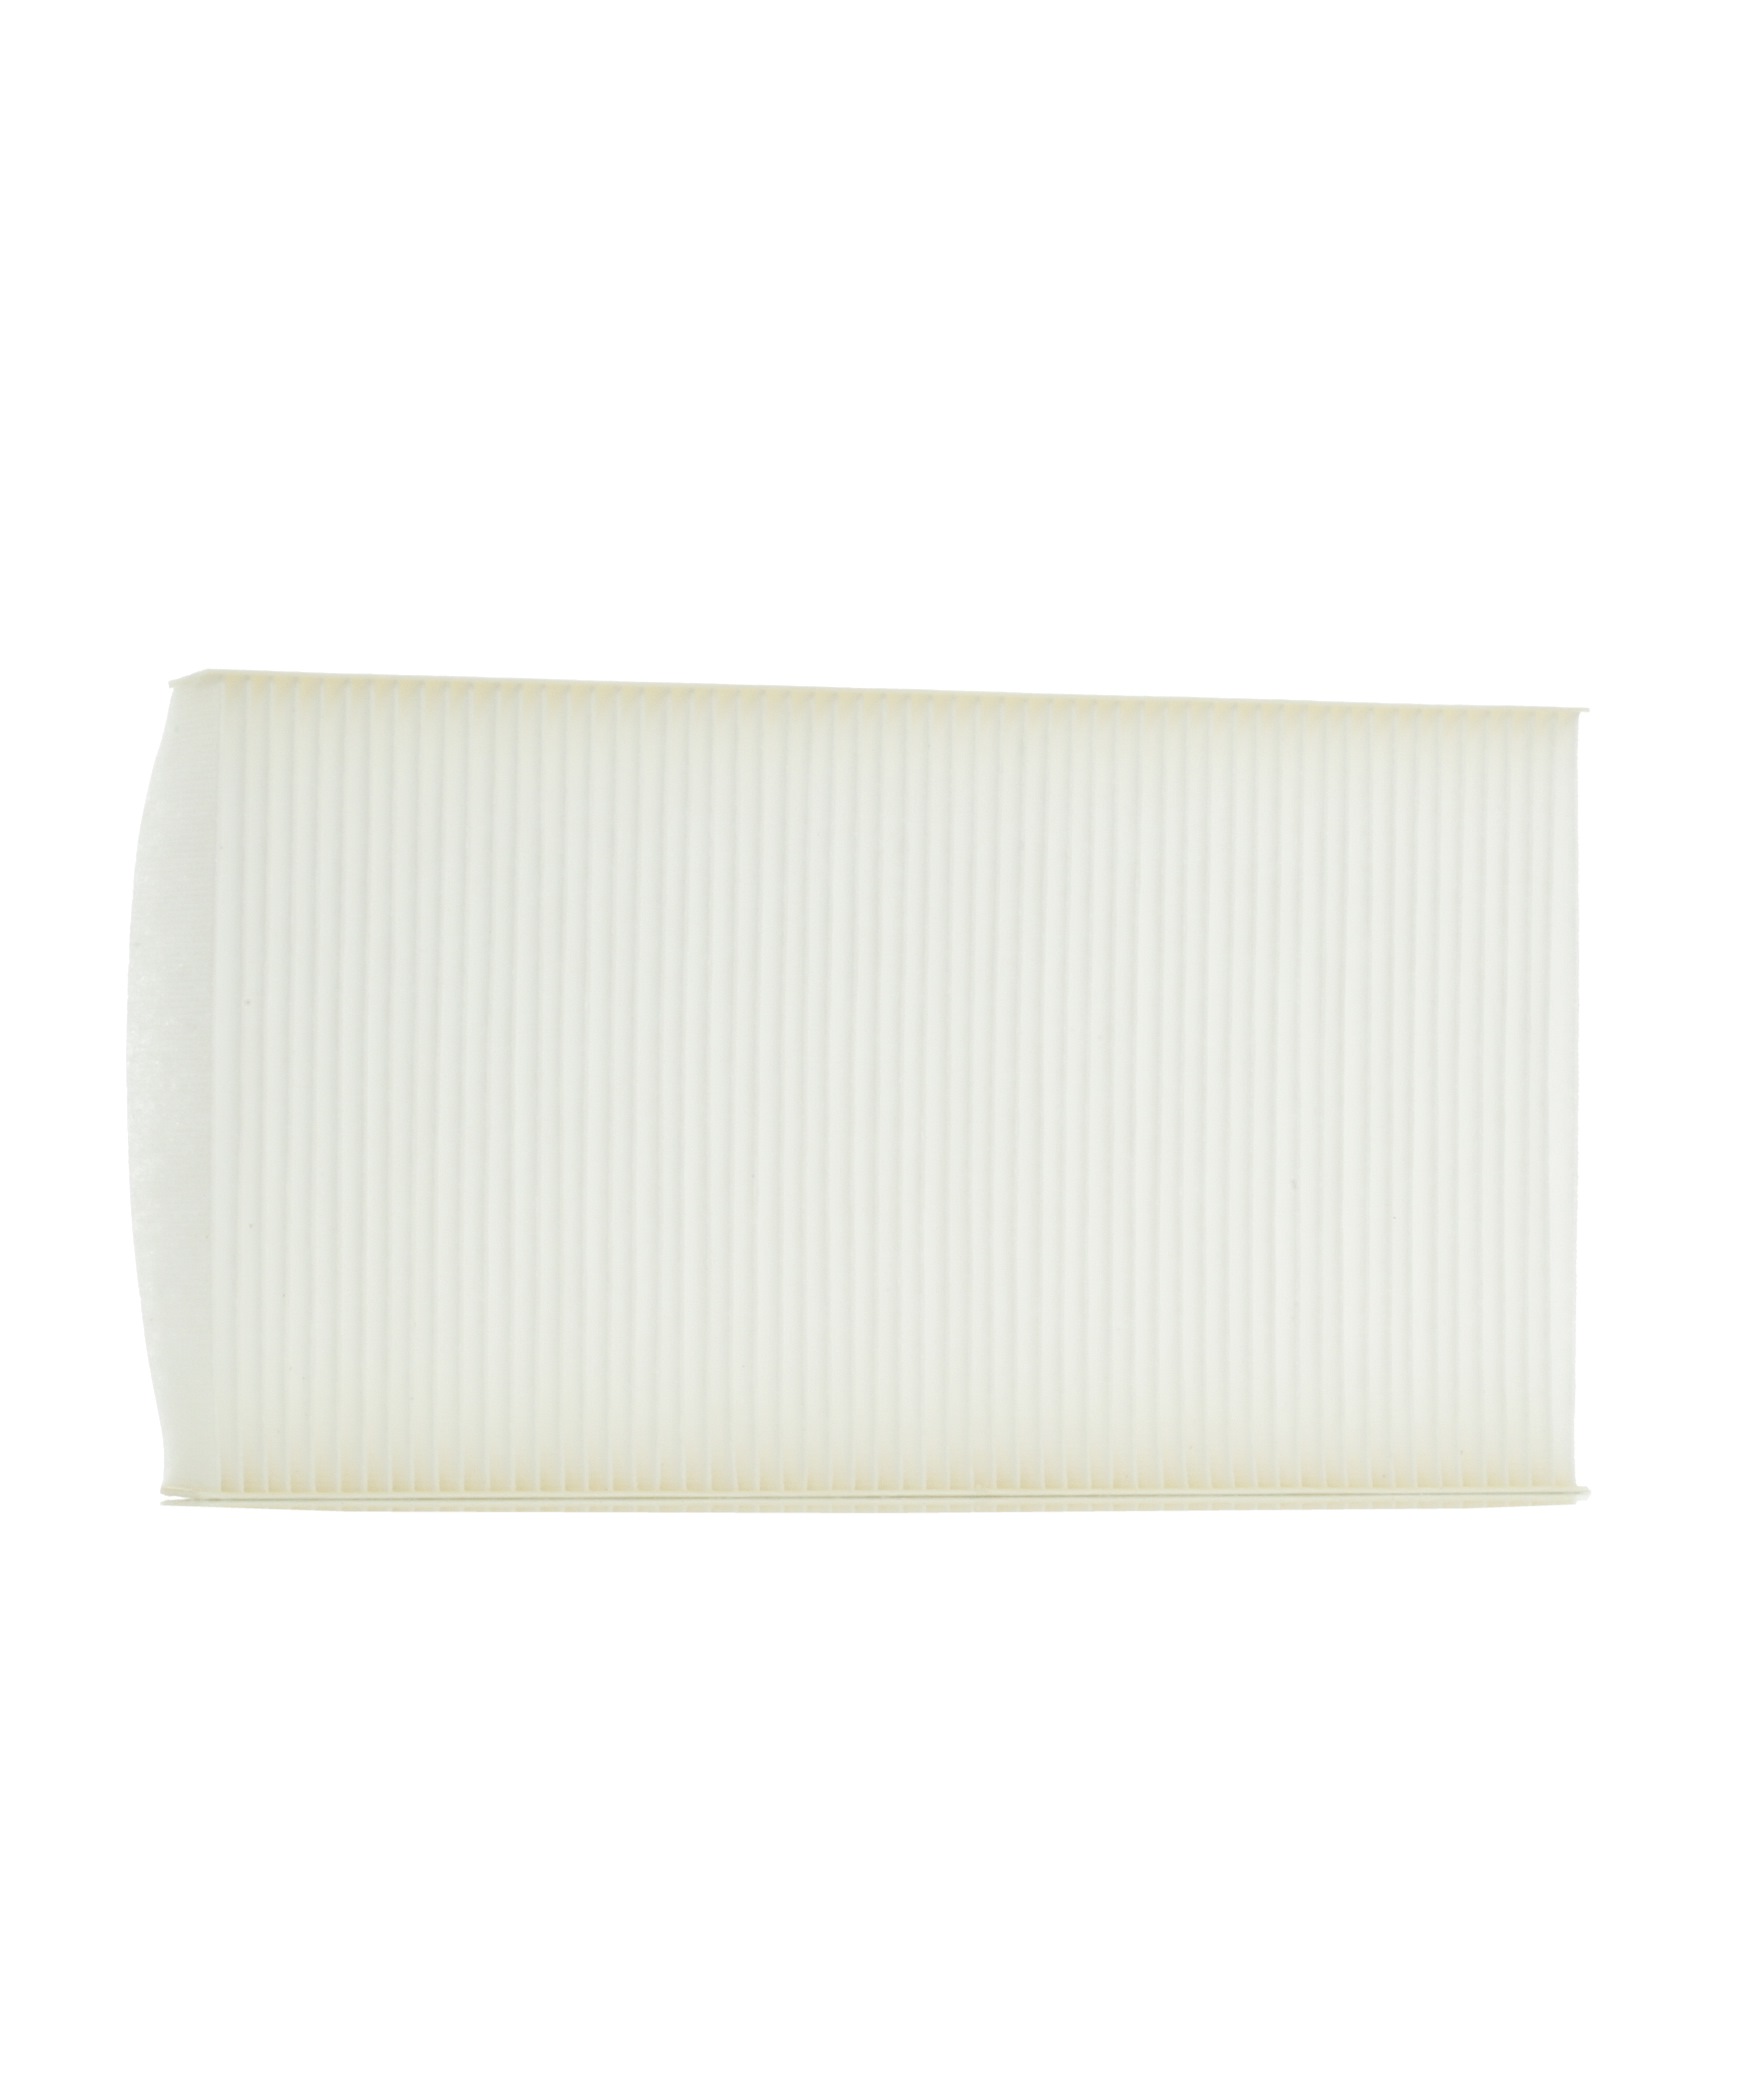 FA197 VALEO CLIMFILTER COMFORT Particulate Filter, 288 mm x 160 mm x 30 mm Width: 160mm, Height: 30mm, Length: 288mm Cabin filter 698197 buy